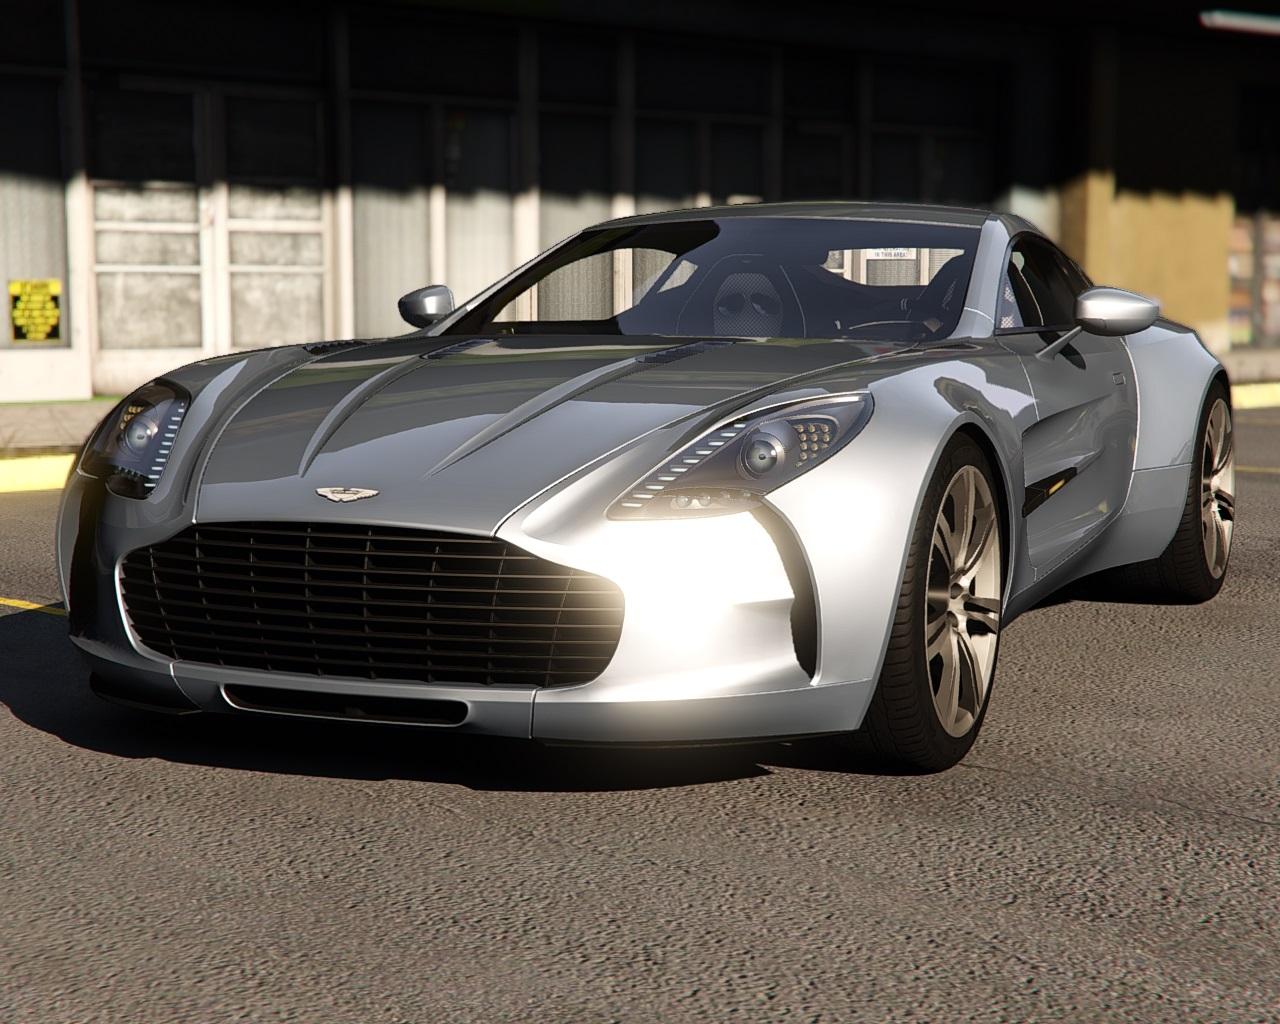 Some aston martin cars! - Add-on requests - Impulse99 FiveM